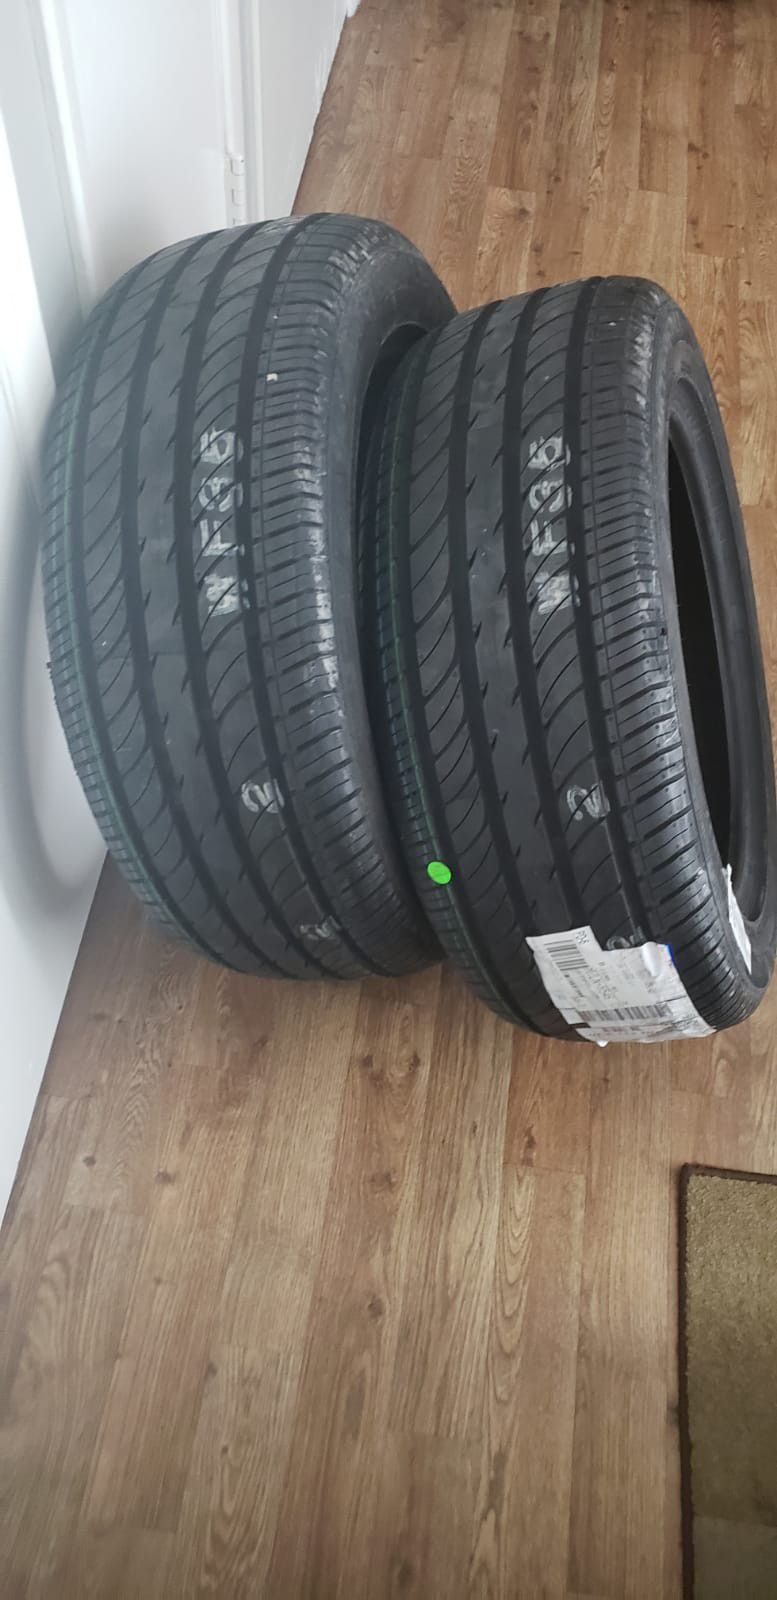 Westfall Tyres Brand new 2 pieces